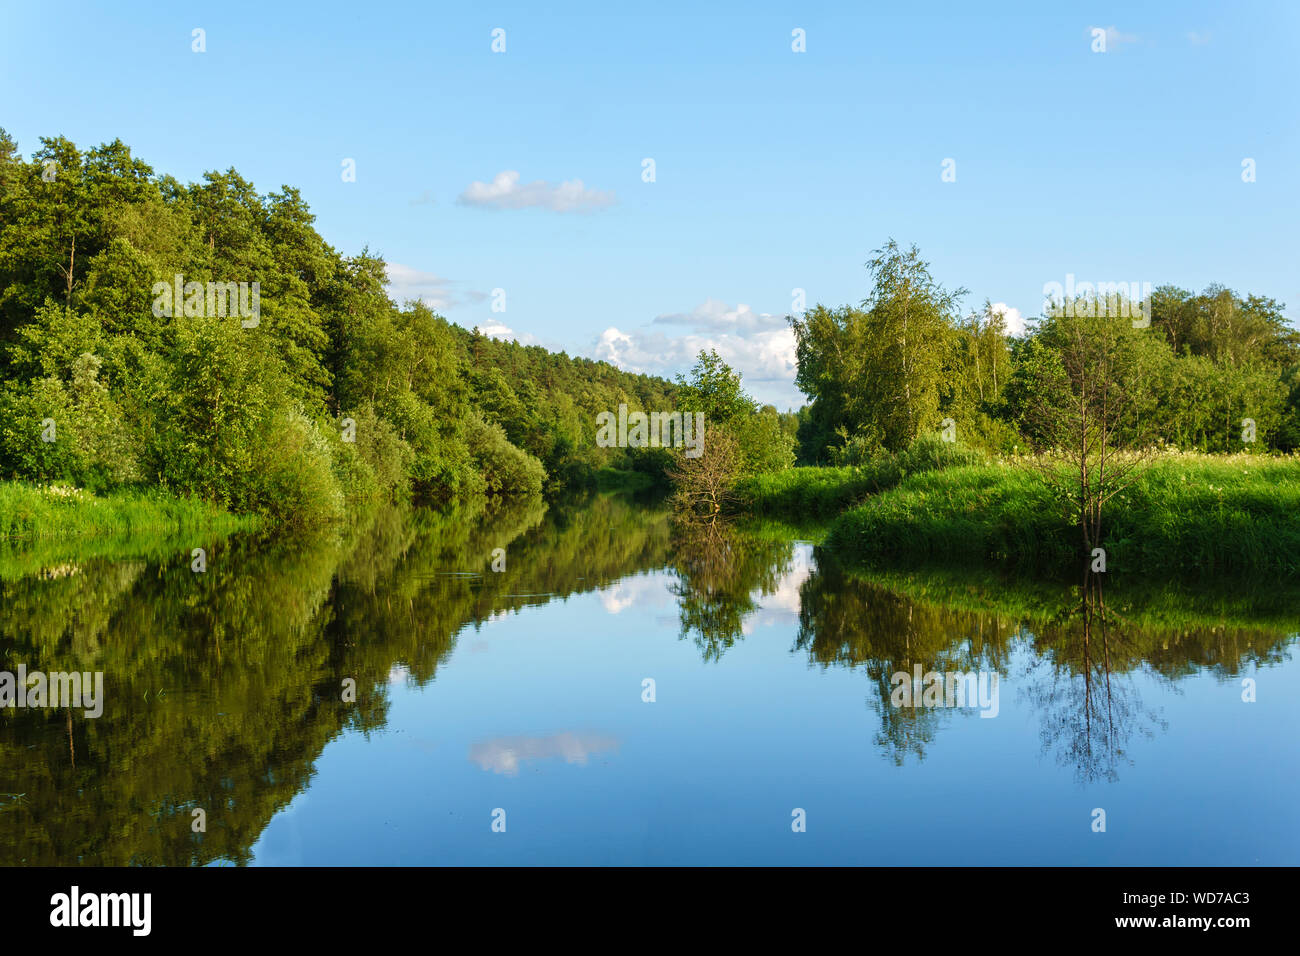 summer landscape of a calm oxbow lake in floodplain with wooded shores Stock Photo